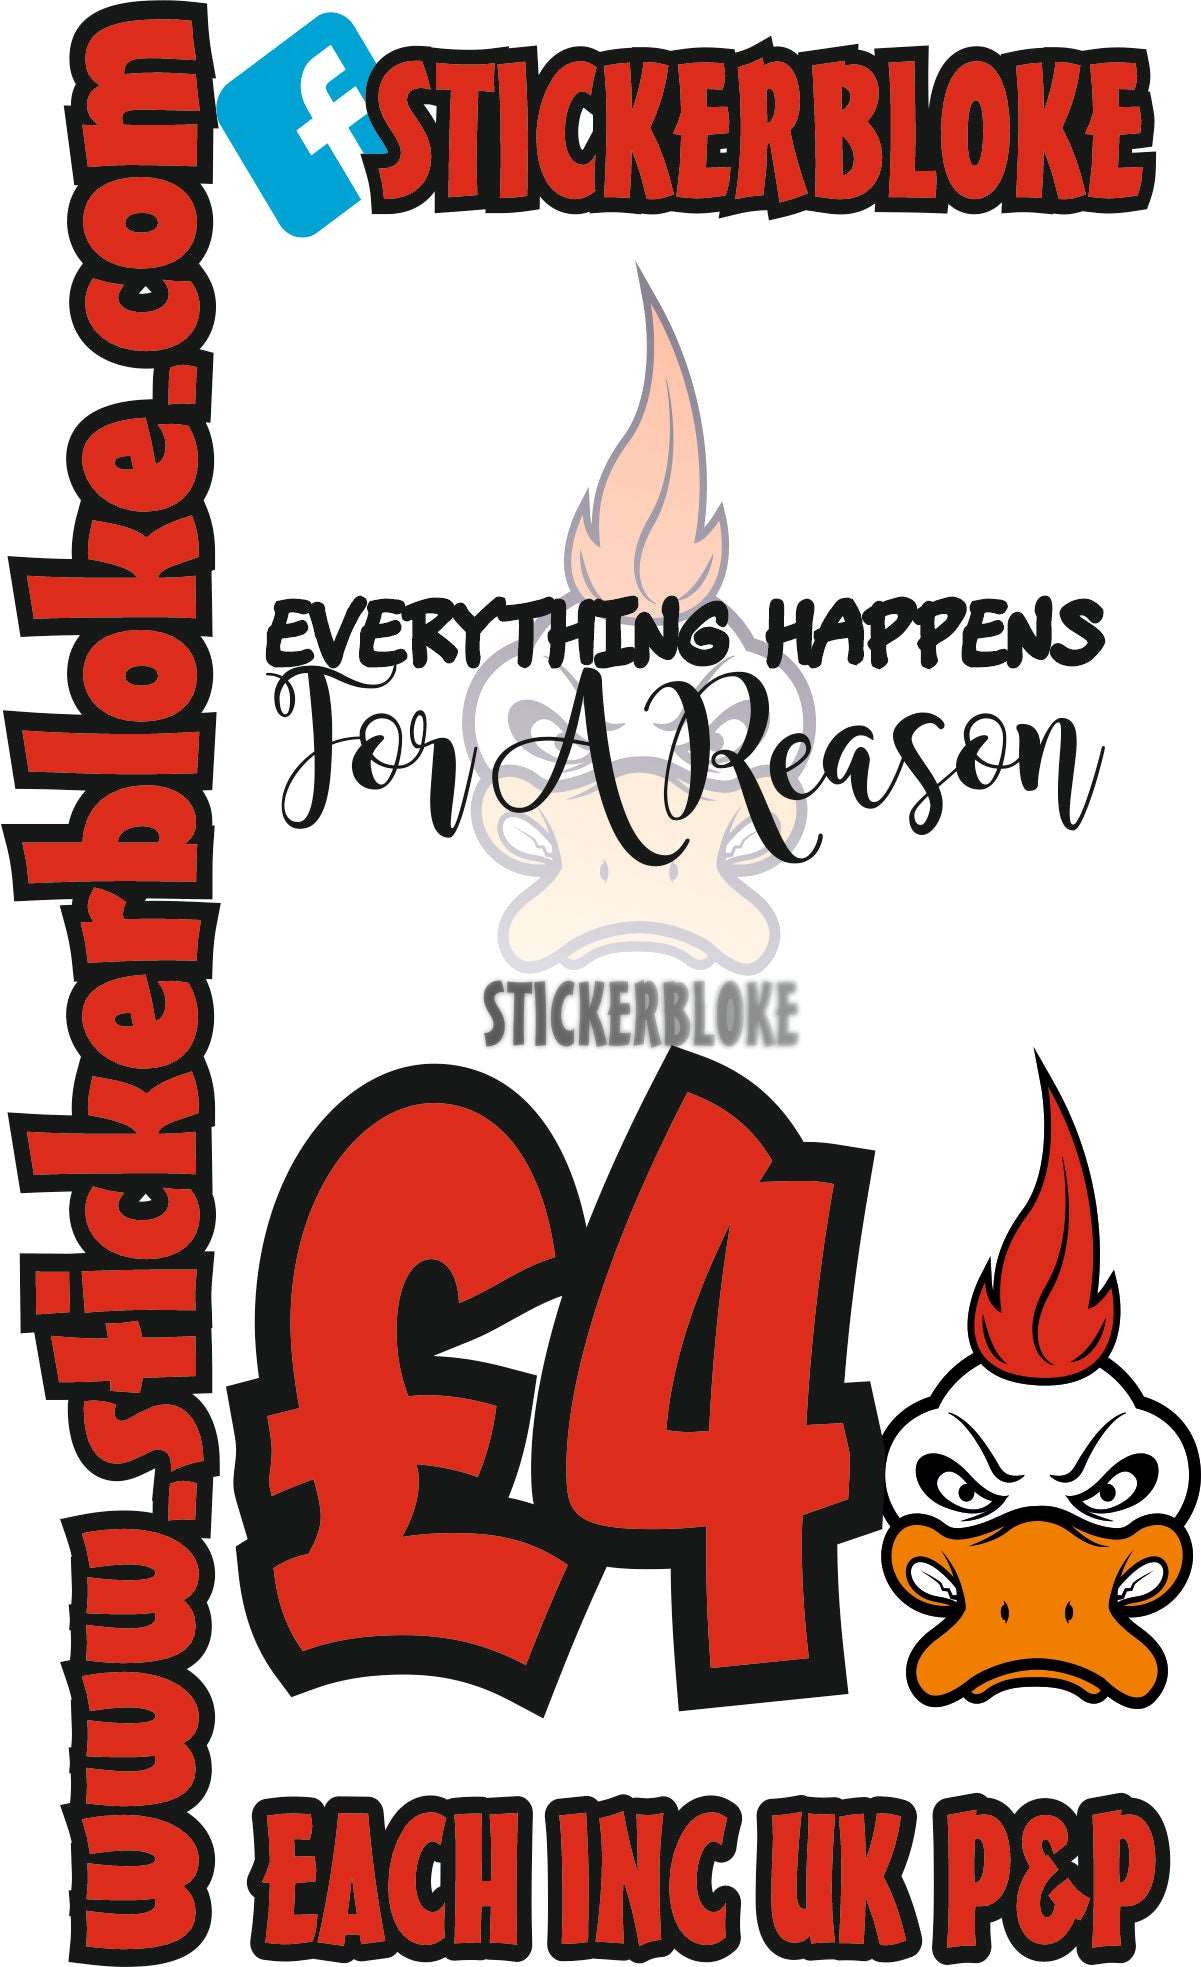 EVERYTHING HAPPENS FOR A REASON - STICKERBLOKE